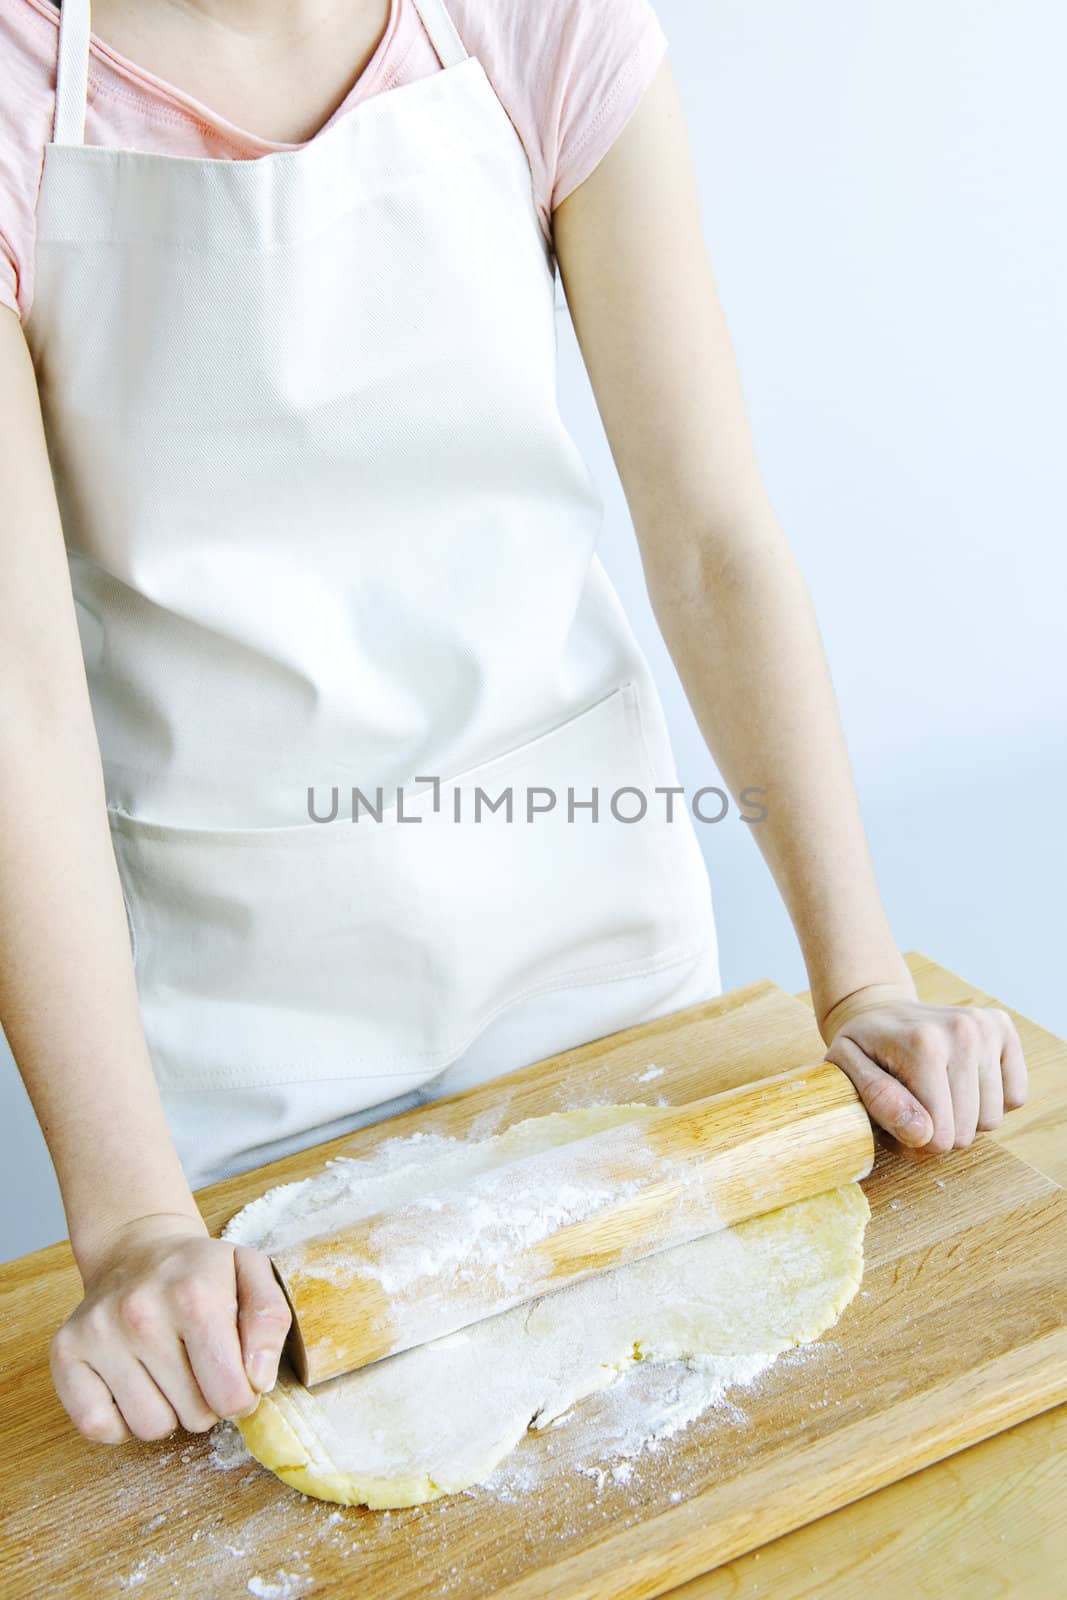 Spreading out cookie dough with wooden rolling pin